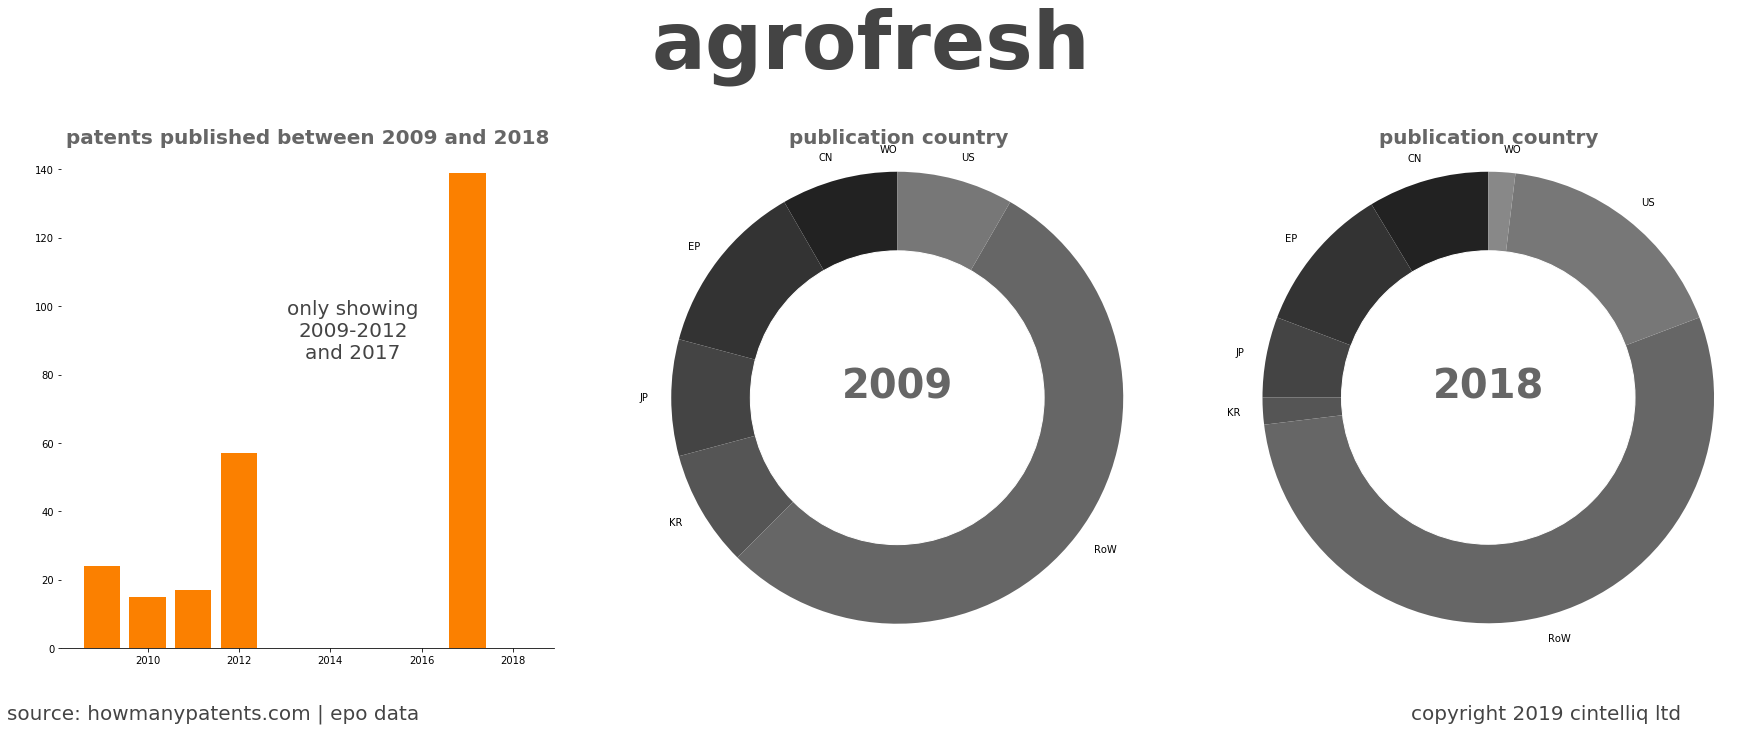 summary of patents for Agrofresh